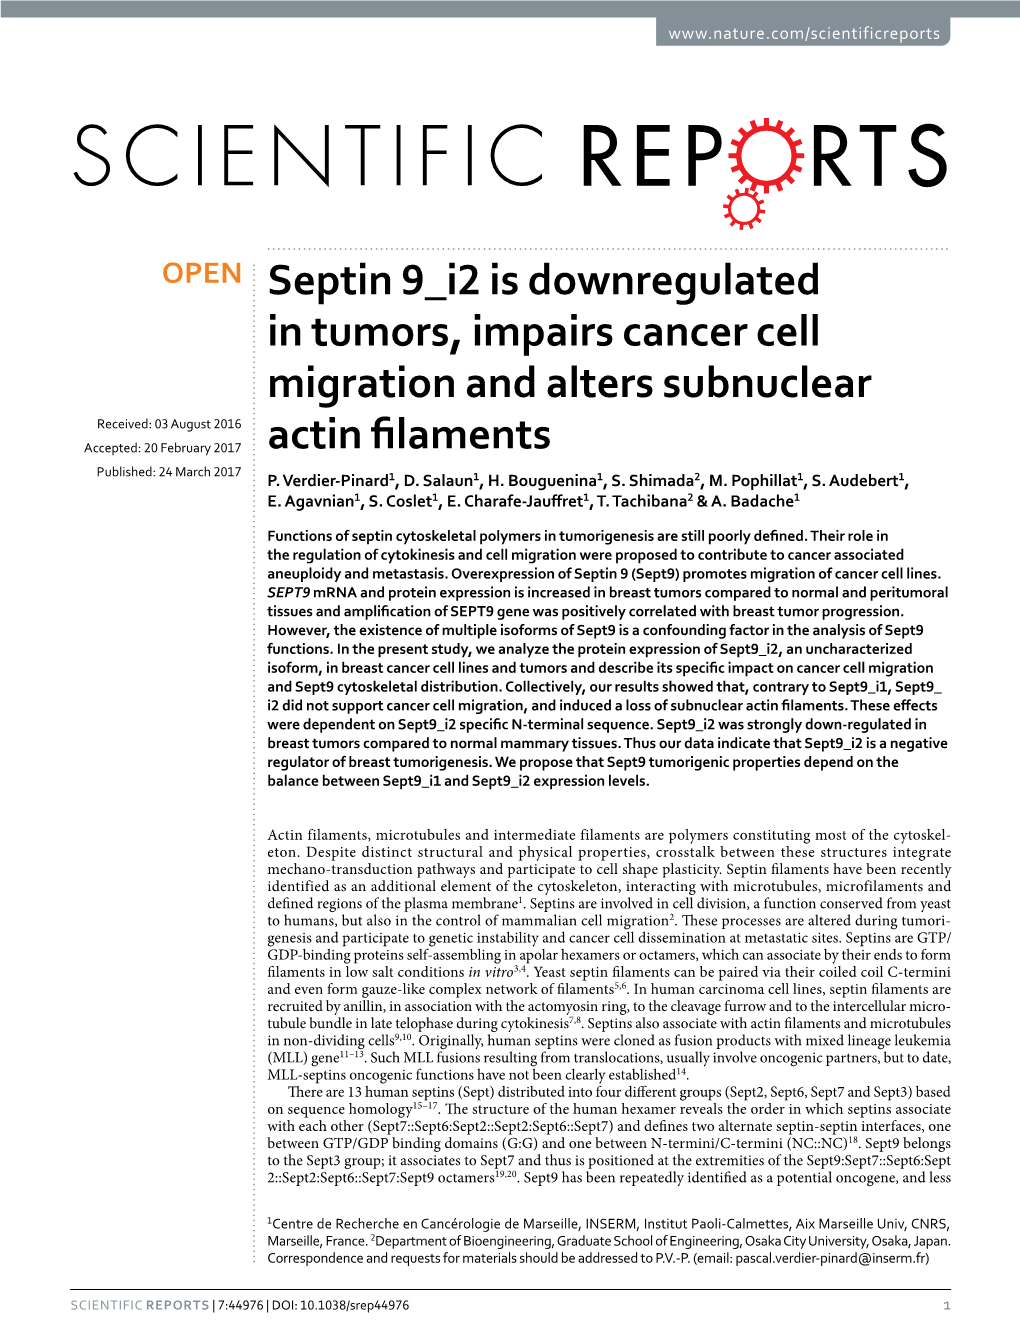 Septin 9 I2 Is Downregulated in Tumors, Impairs